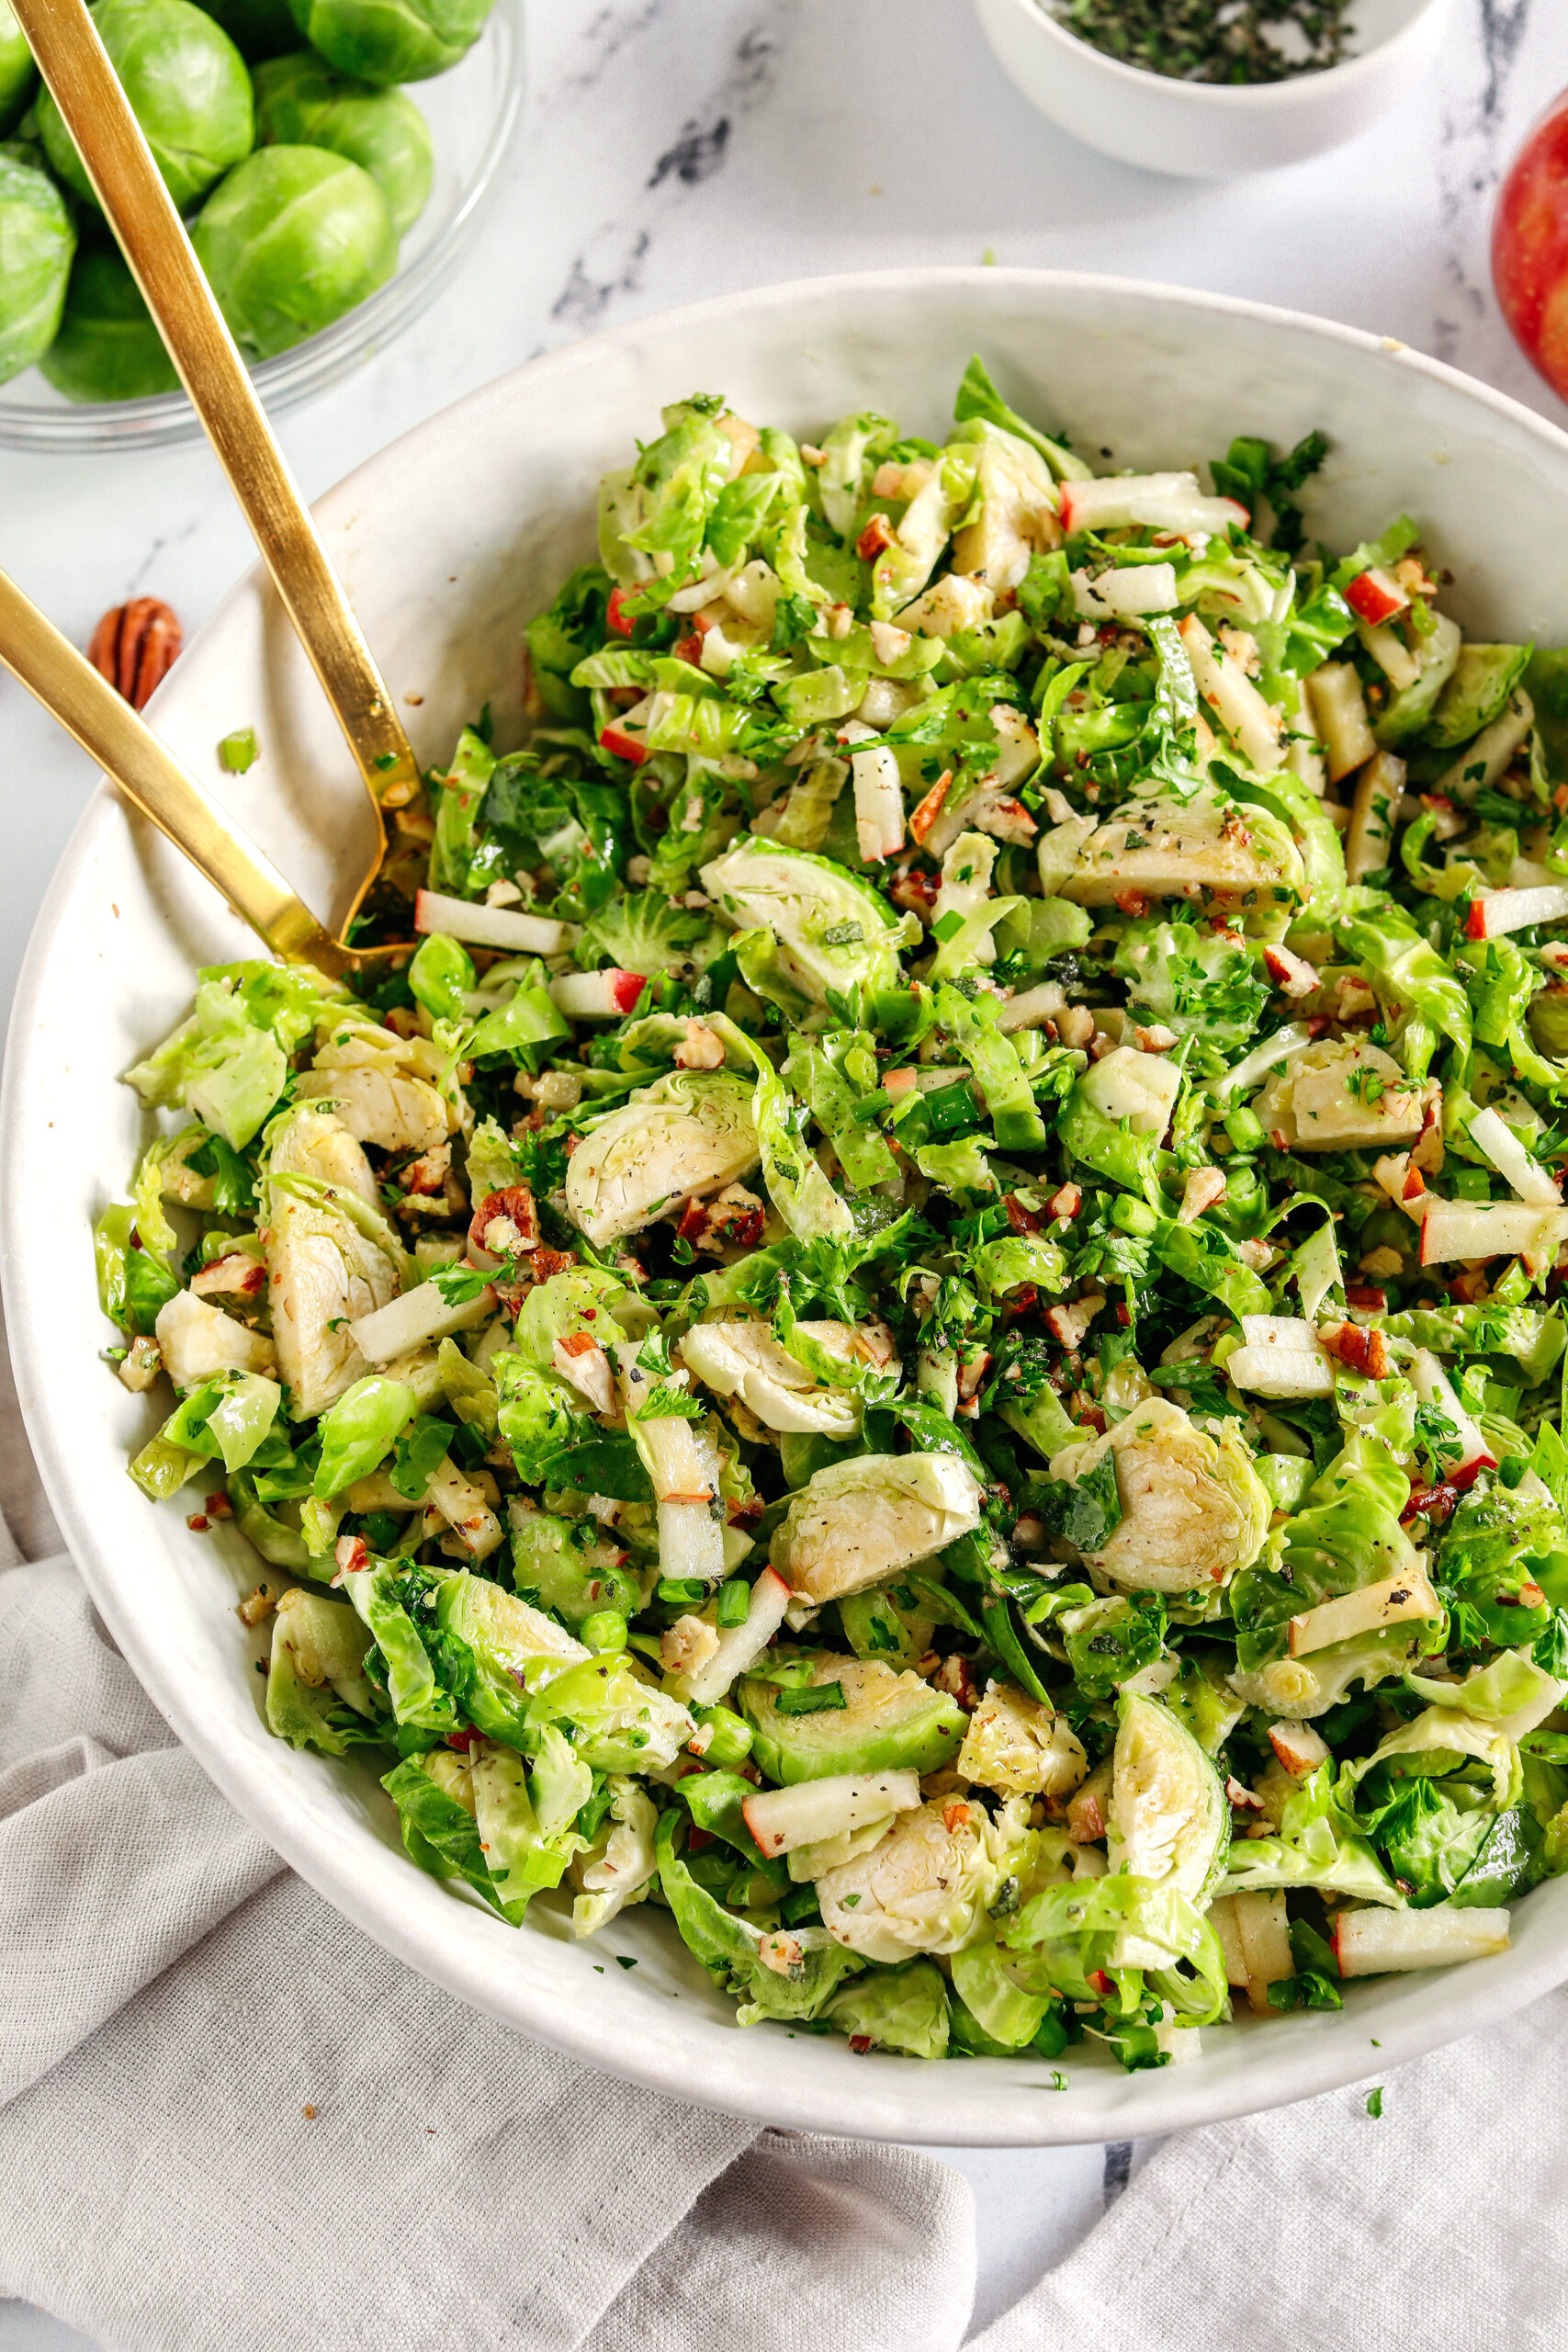 The most delicious Fall Brussels Sprout Salad made with shaved brussels sprouts, chopped apples and crunchy pecans all tossed with a maple dijon dressing!  This salad makes a great side dish for the holidays or everyday meals.